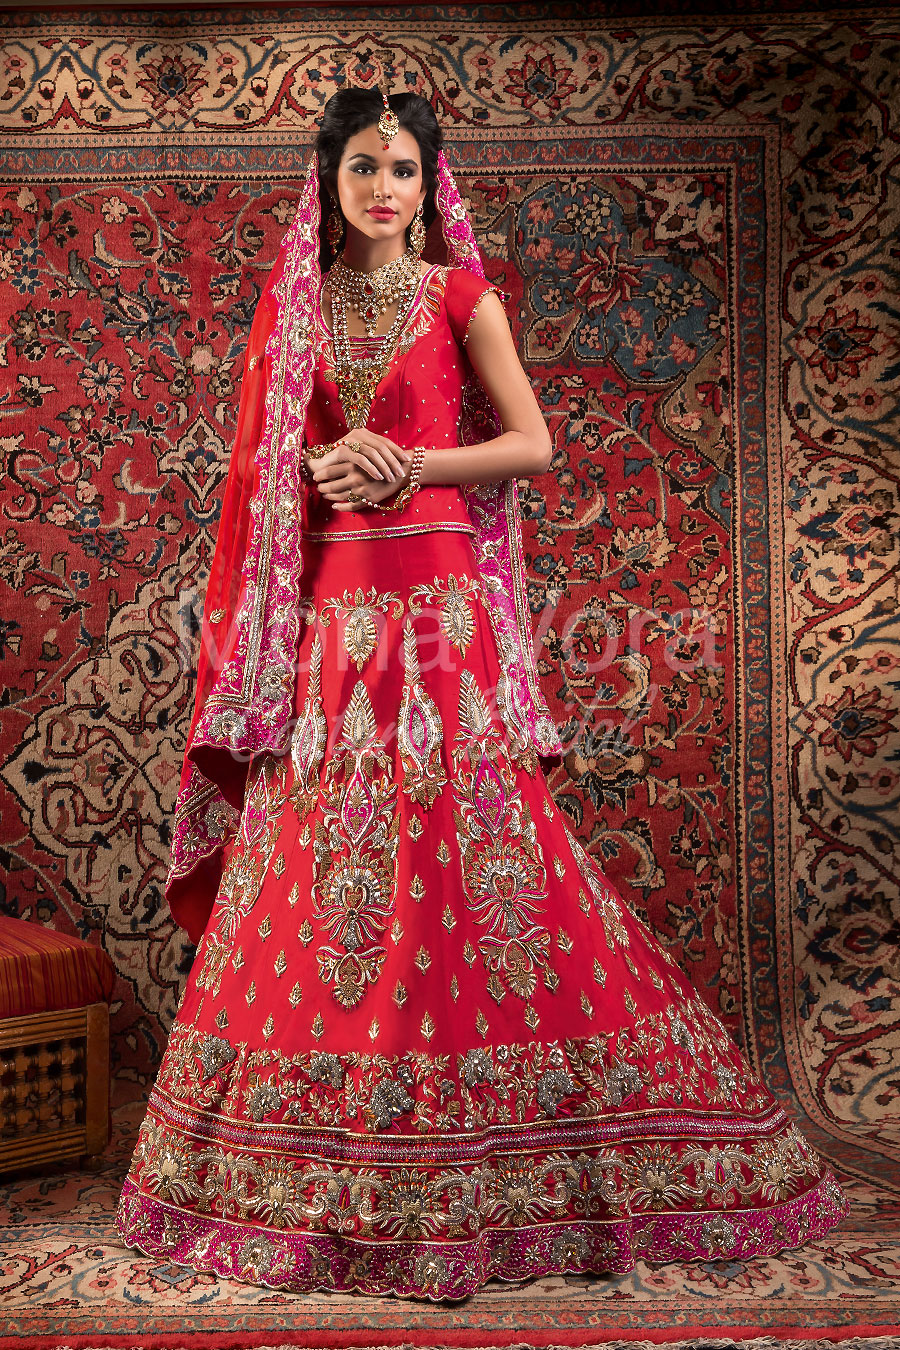 The Indian Bride Look Book – Six Different Types of Bridal Attire